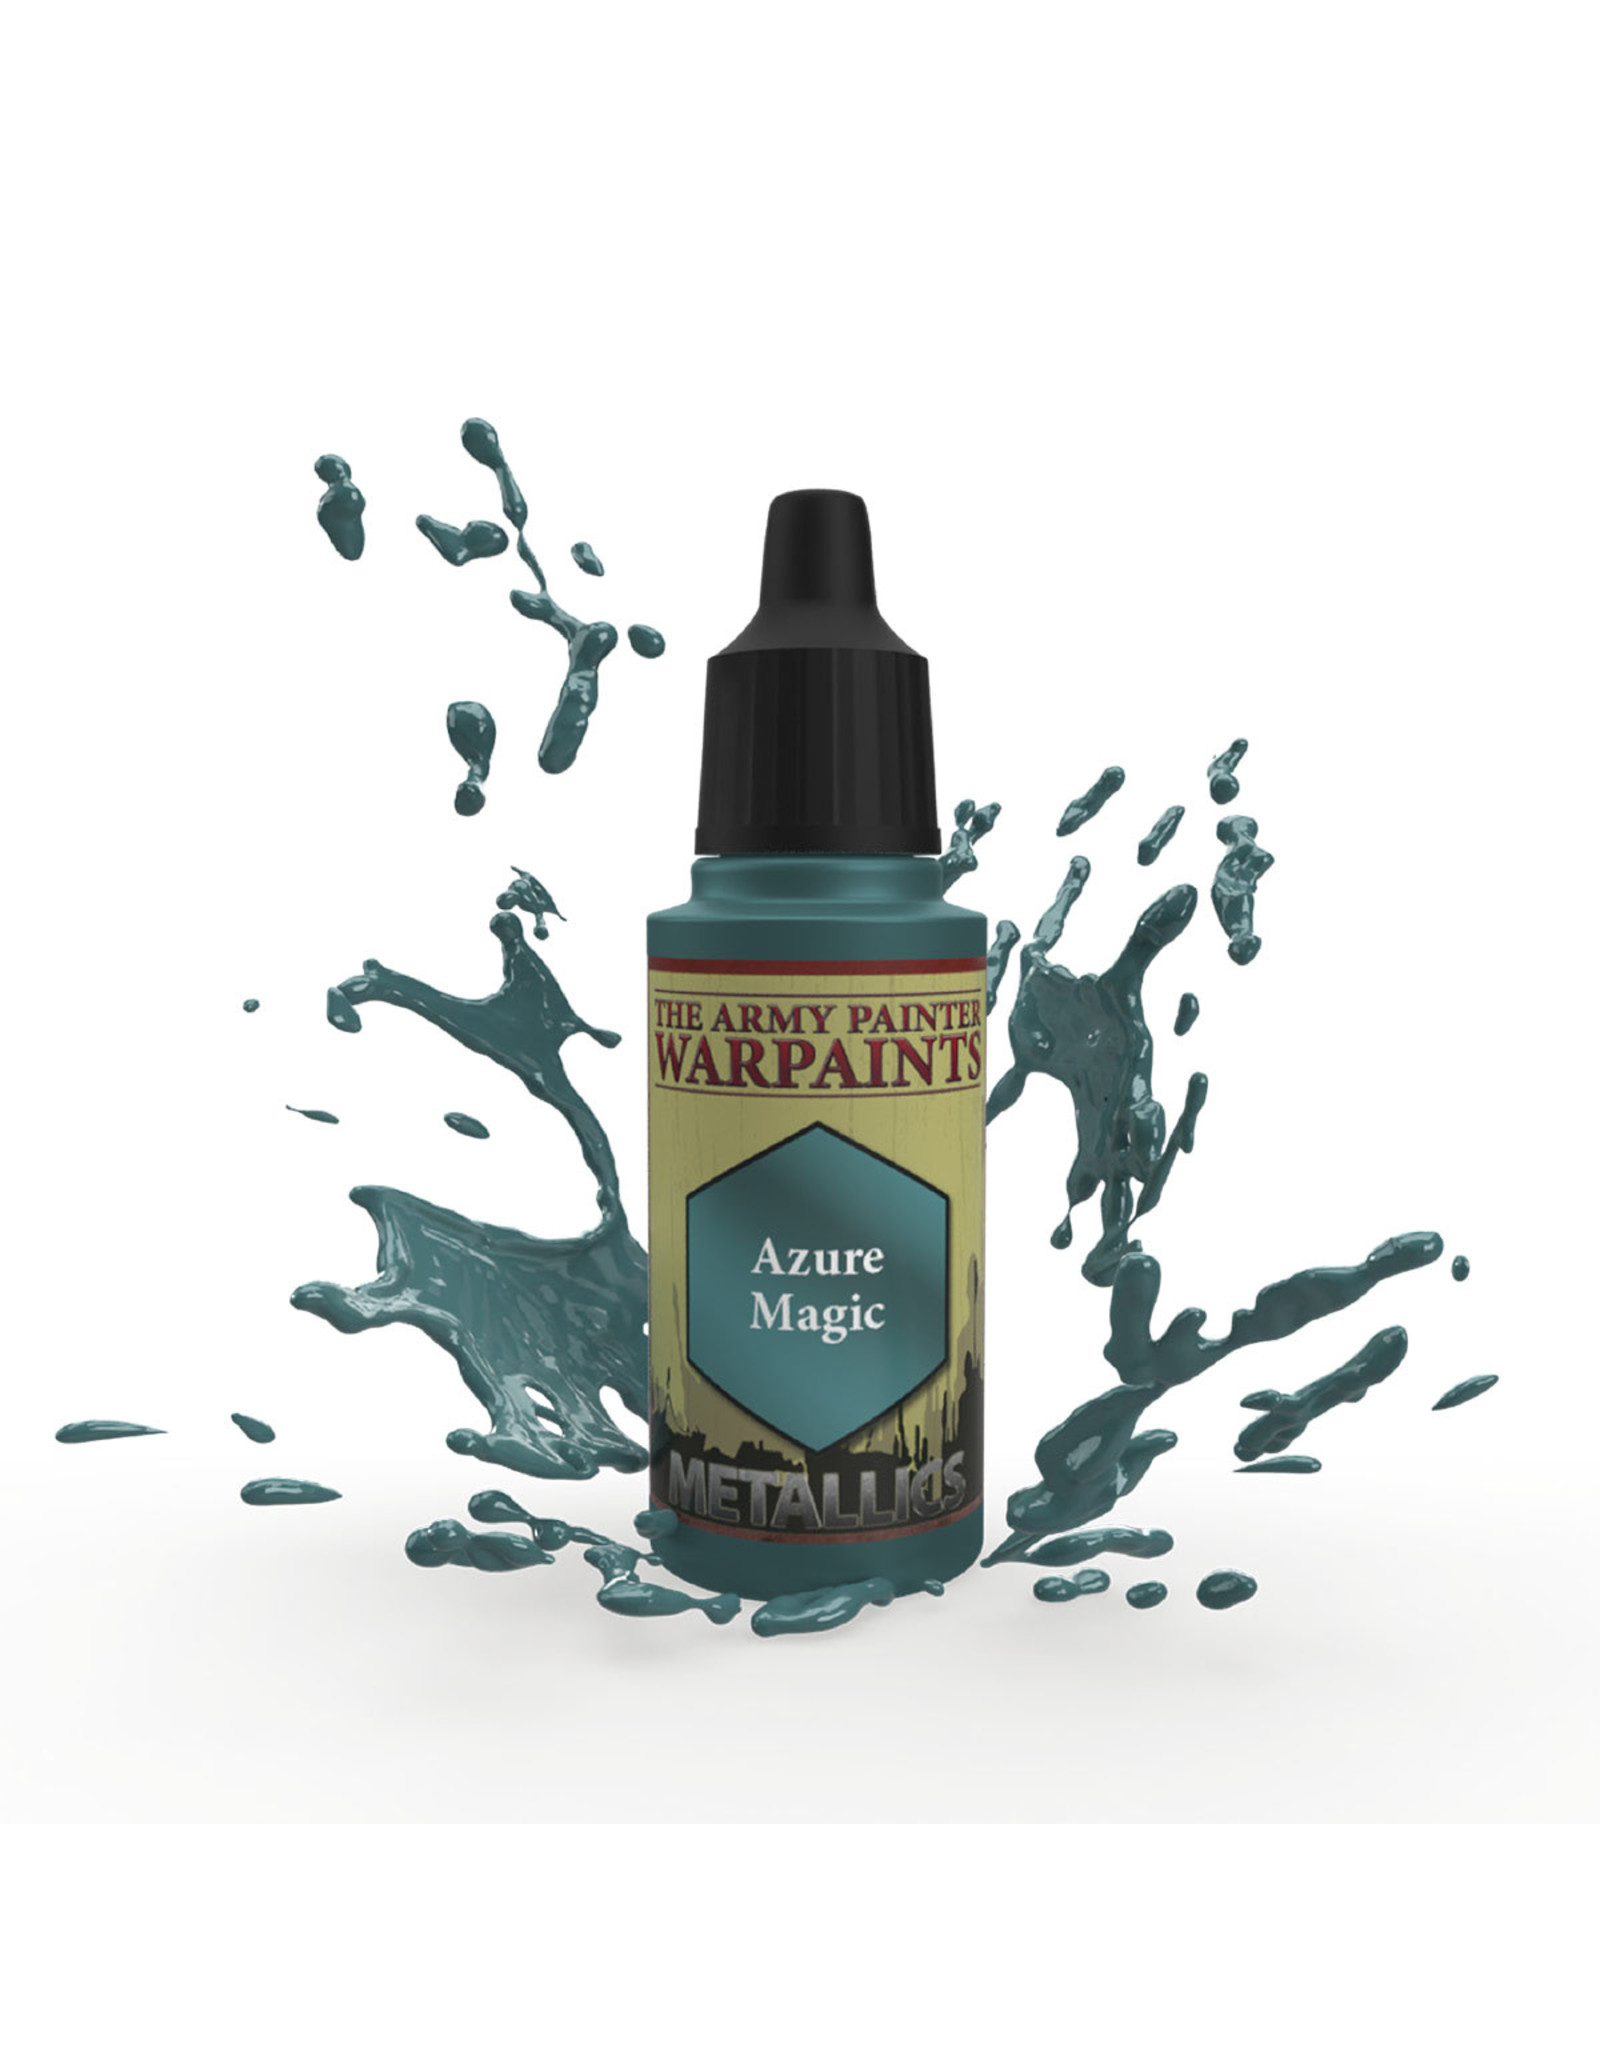 The Army Painter The Army Painter Warpaints Metallics: Azure Magic